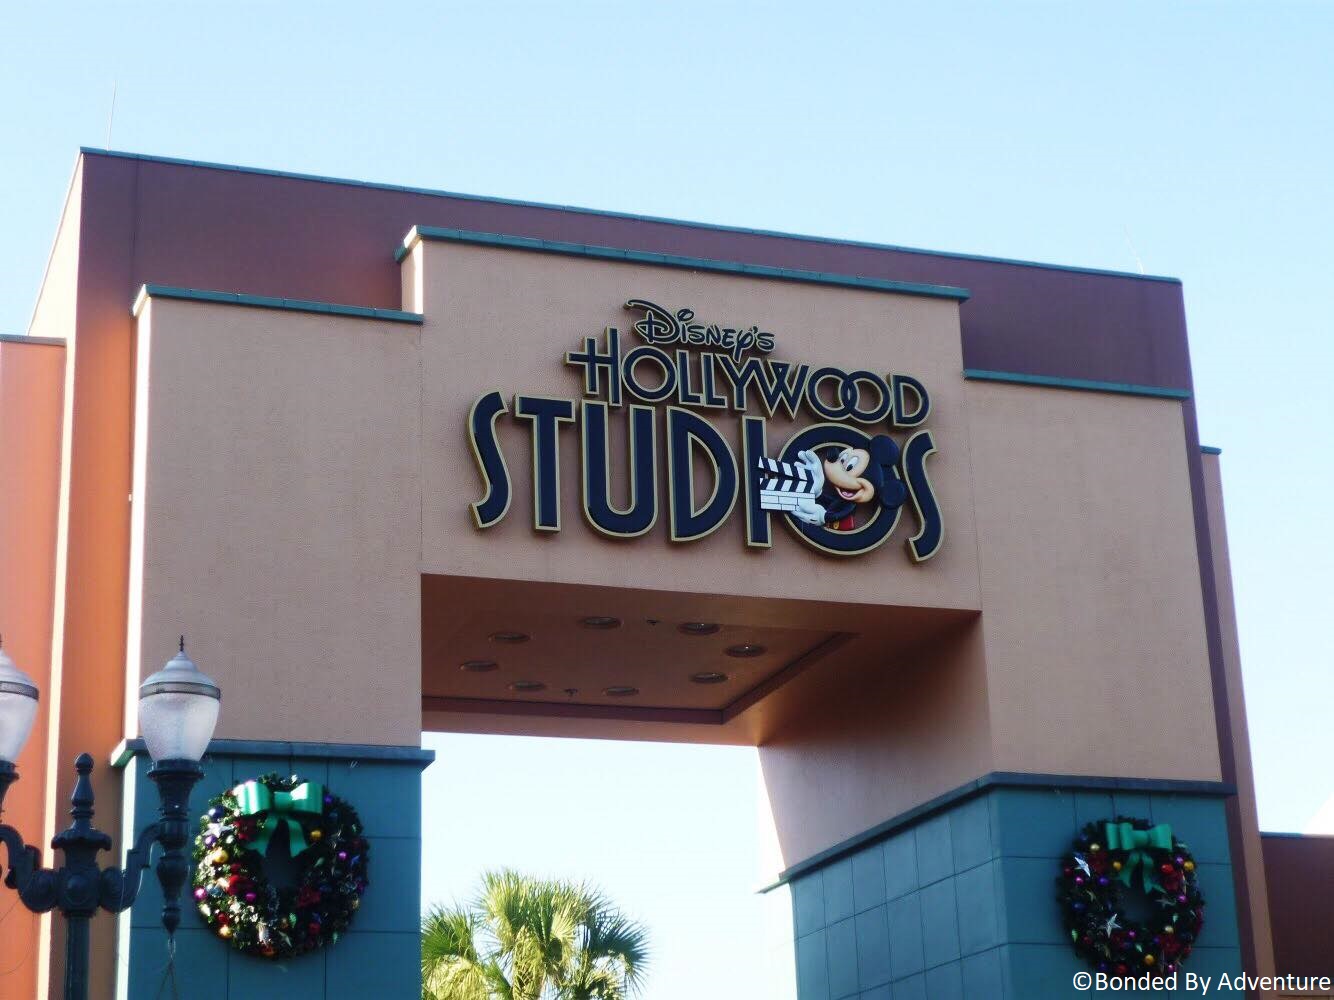 Hollywood Studios – Did You Know?